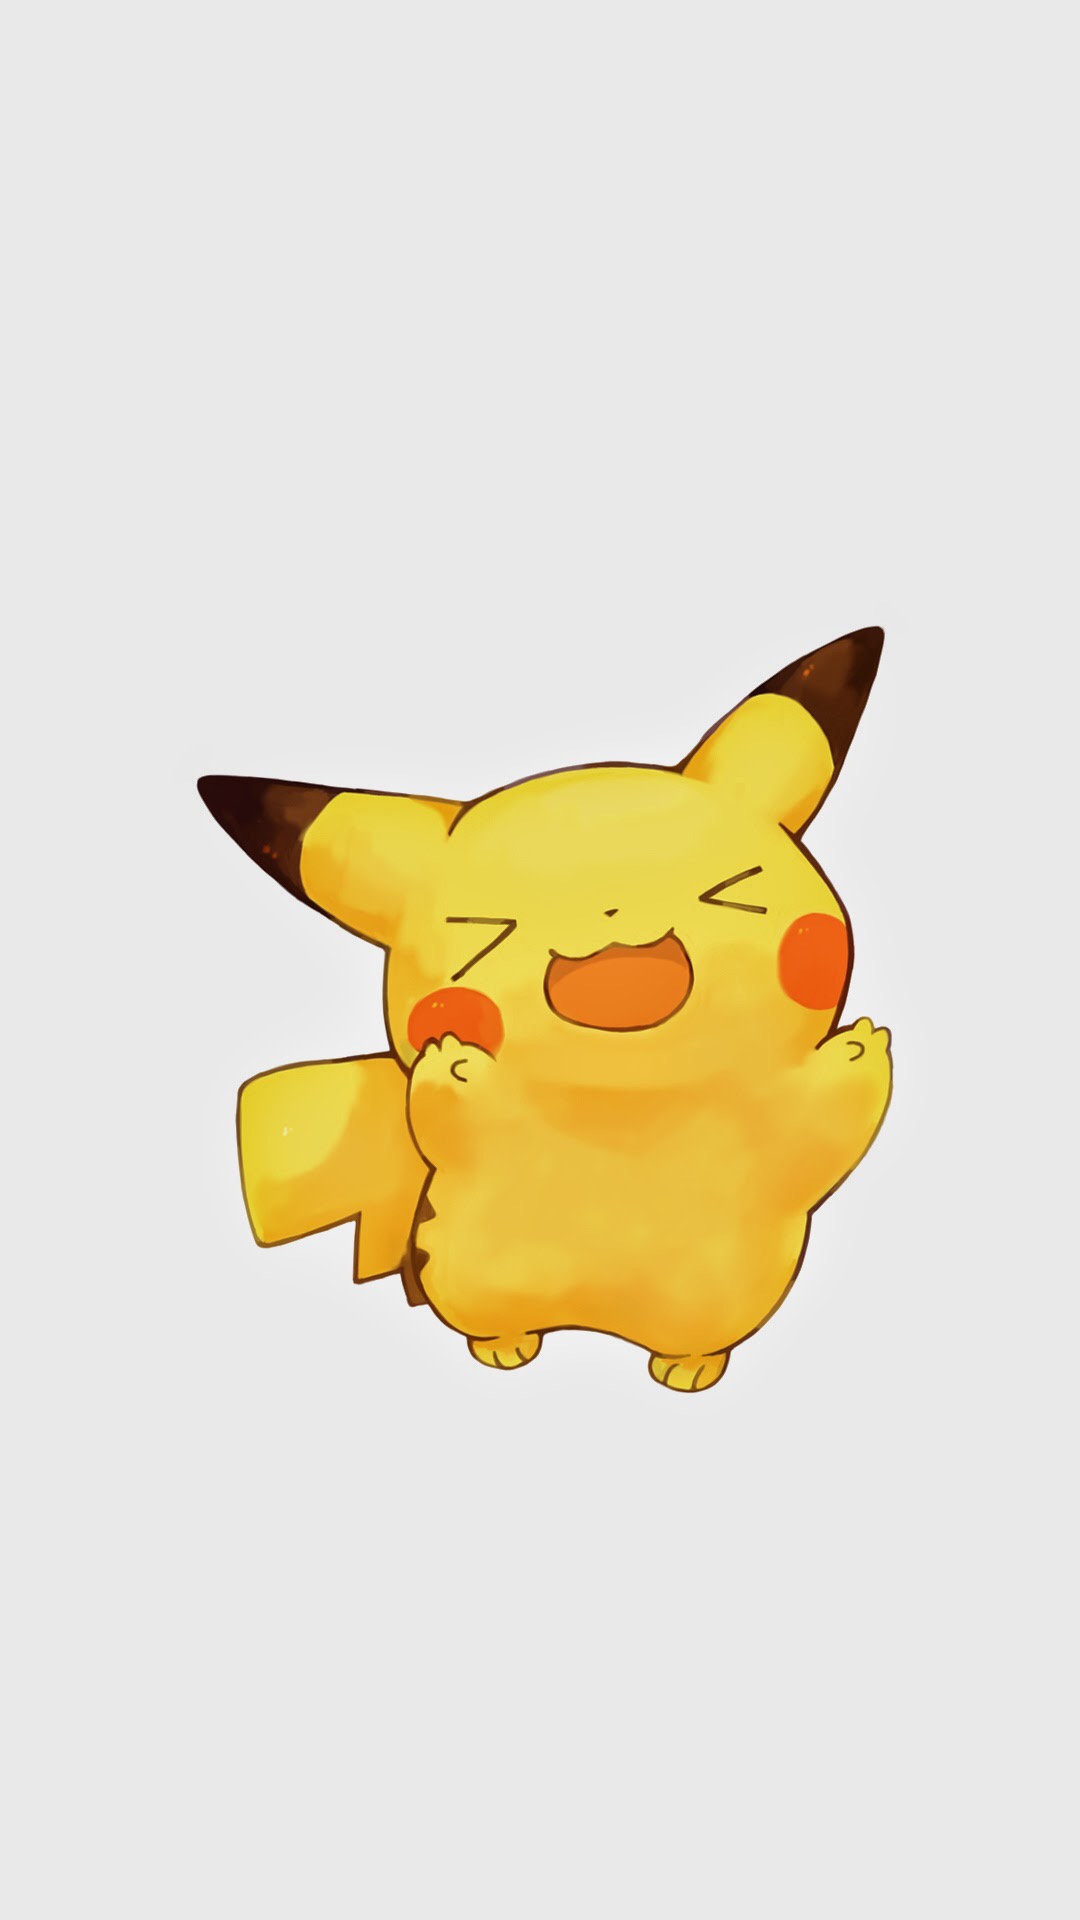 For Iphone L From App L Ios L - Cute Pikachu Wallpaper Iphone 6 , HD Wallpaper & Backgrounds